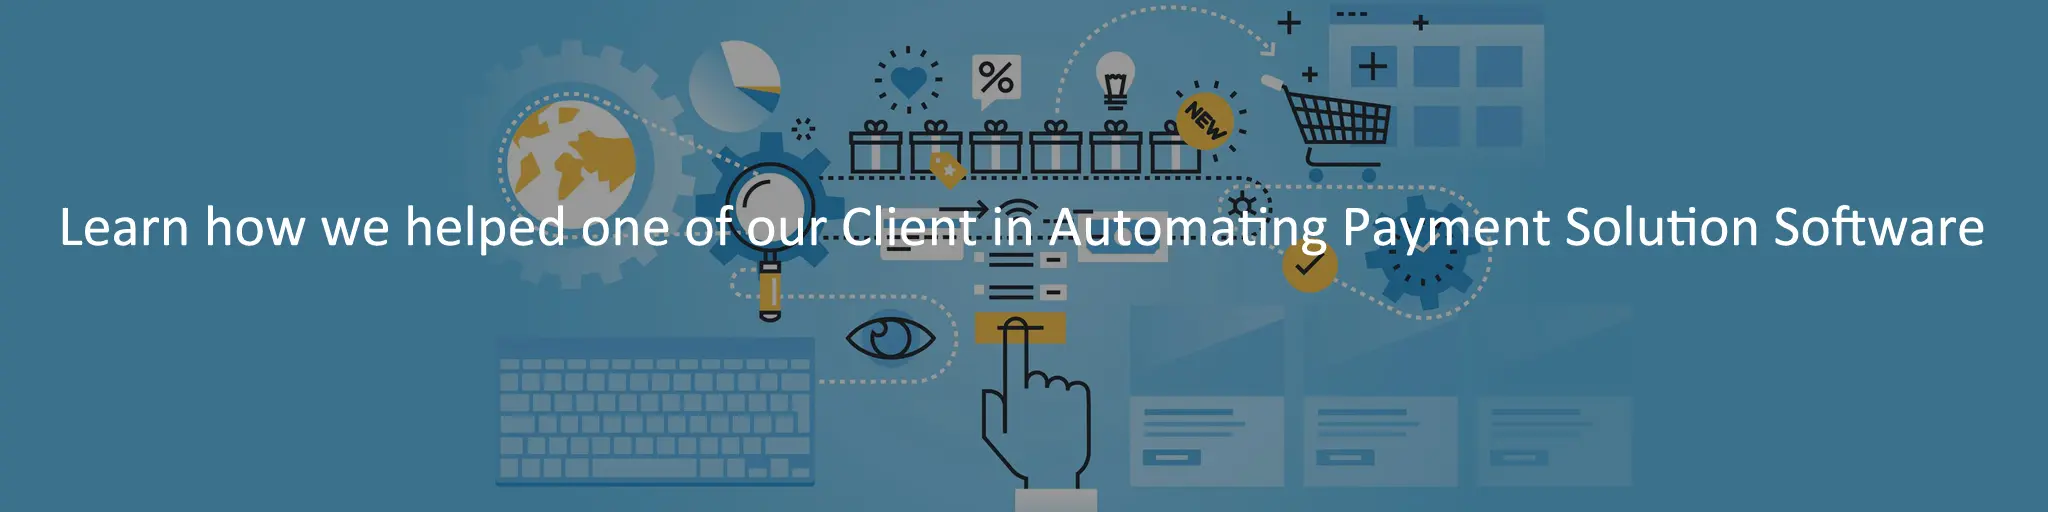 Learn how we helped one of our Client in Automating Payment Solution Software